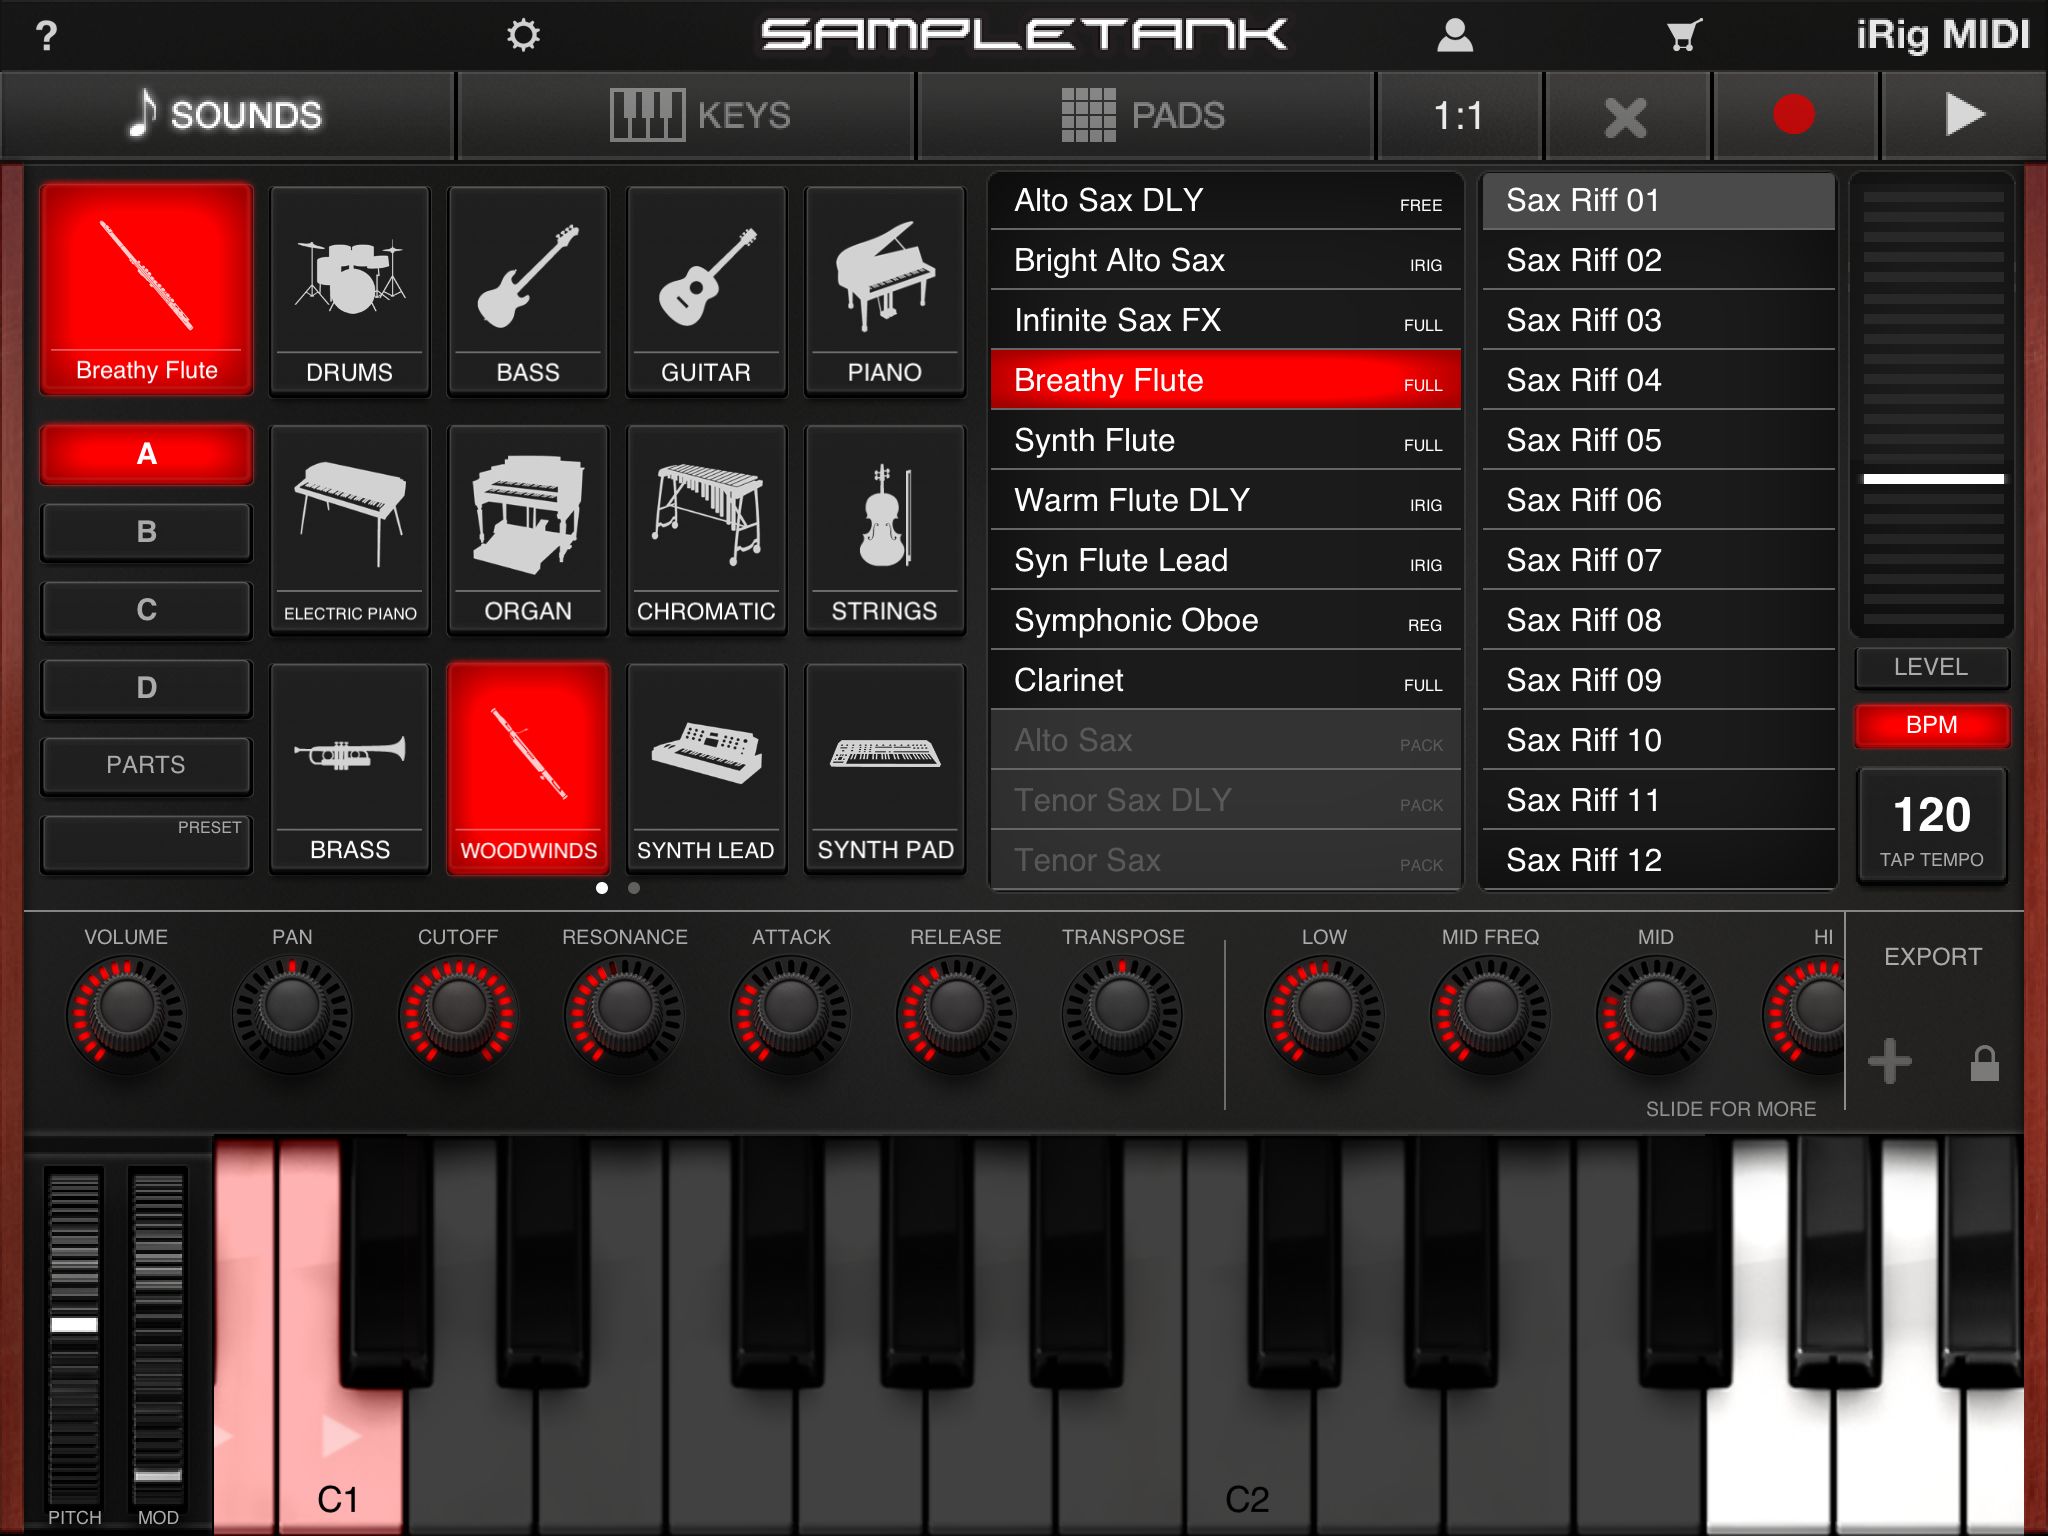 If You Want to Get 'Real', Get SampleTank! My Hands-On Review